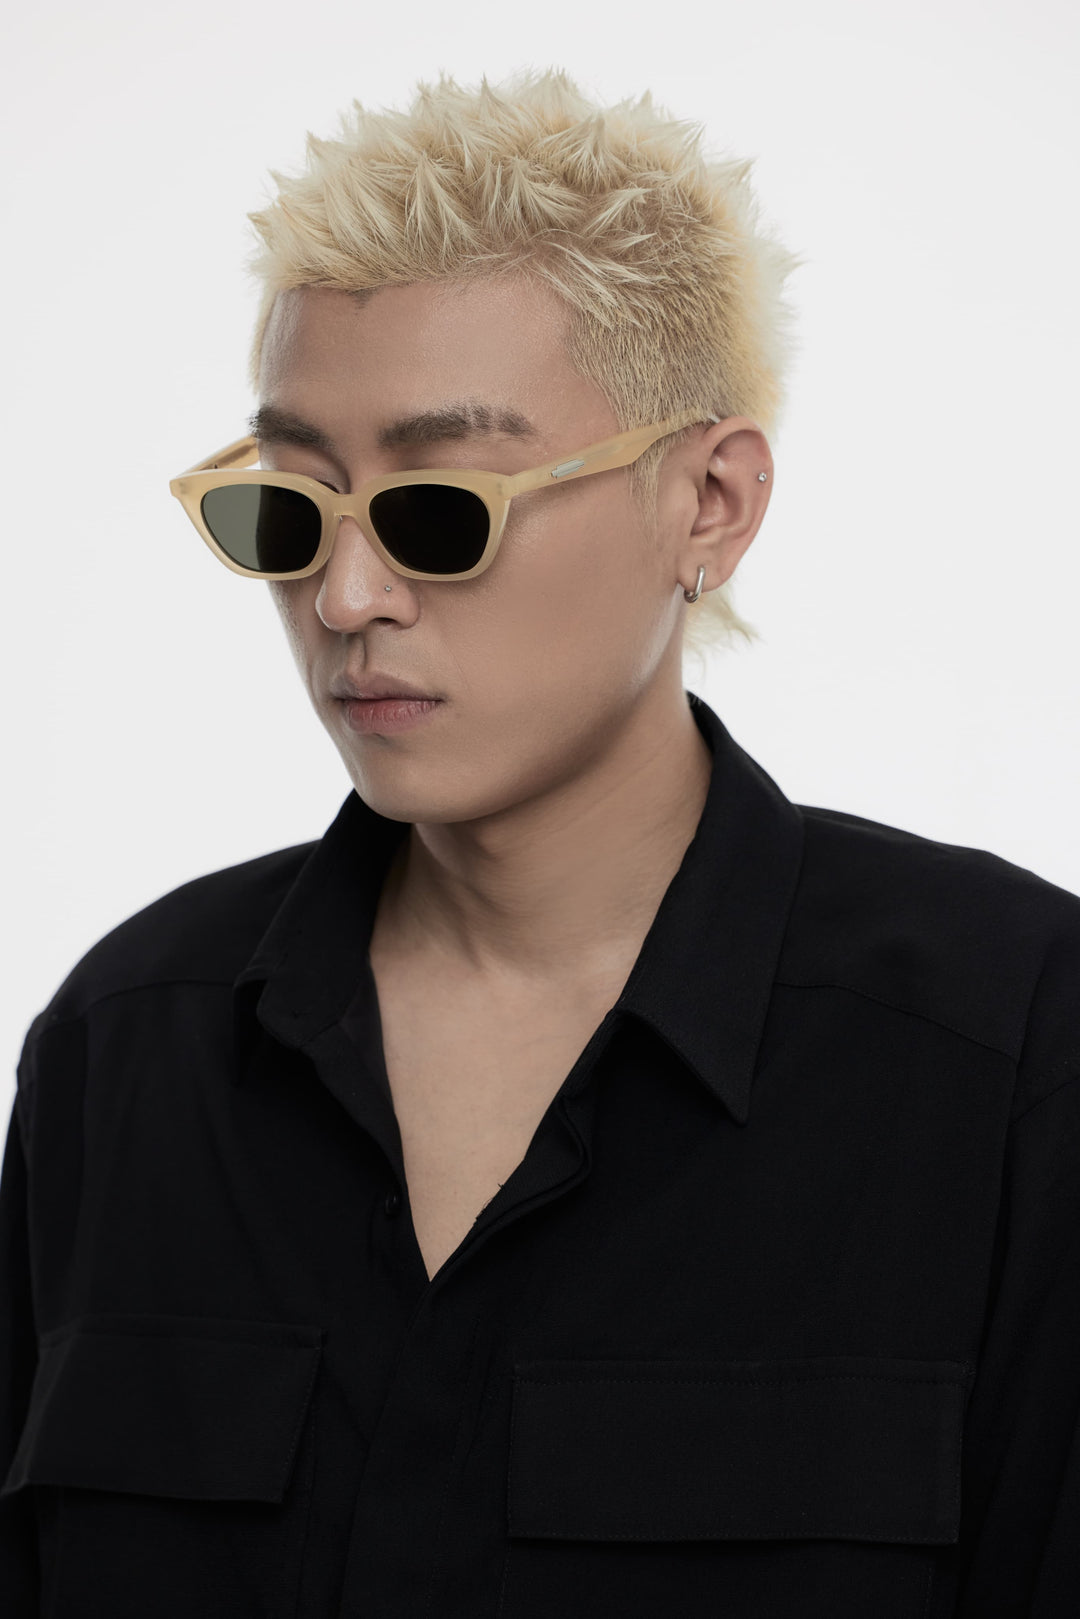 Model of his side face looking down wearing Lust in yellow cat-eye Korean Fashion Sunglasses from Mercury Retrograde Burr Puzzle Collection 